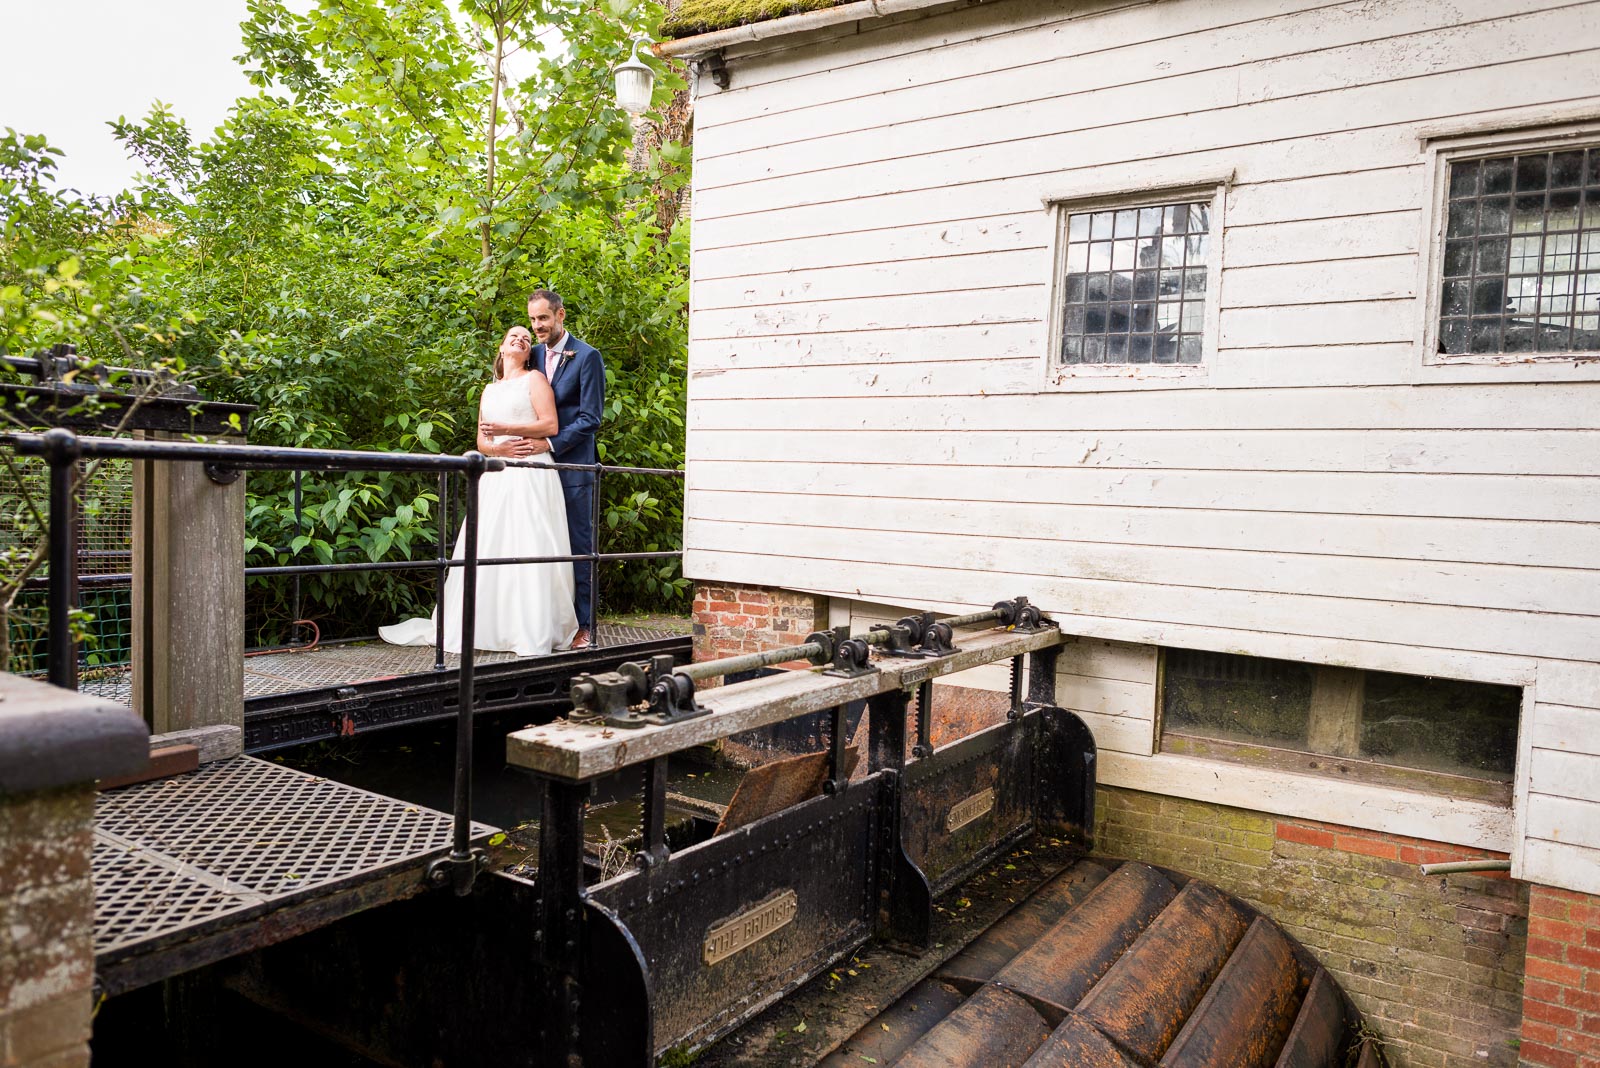 Donna and Andy photographed next to a water wheel in Halsham after their wedding.